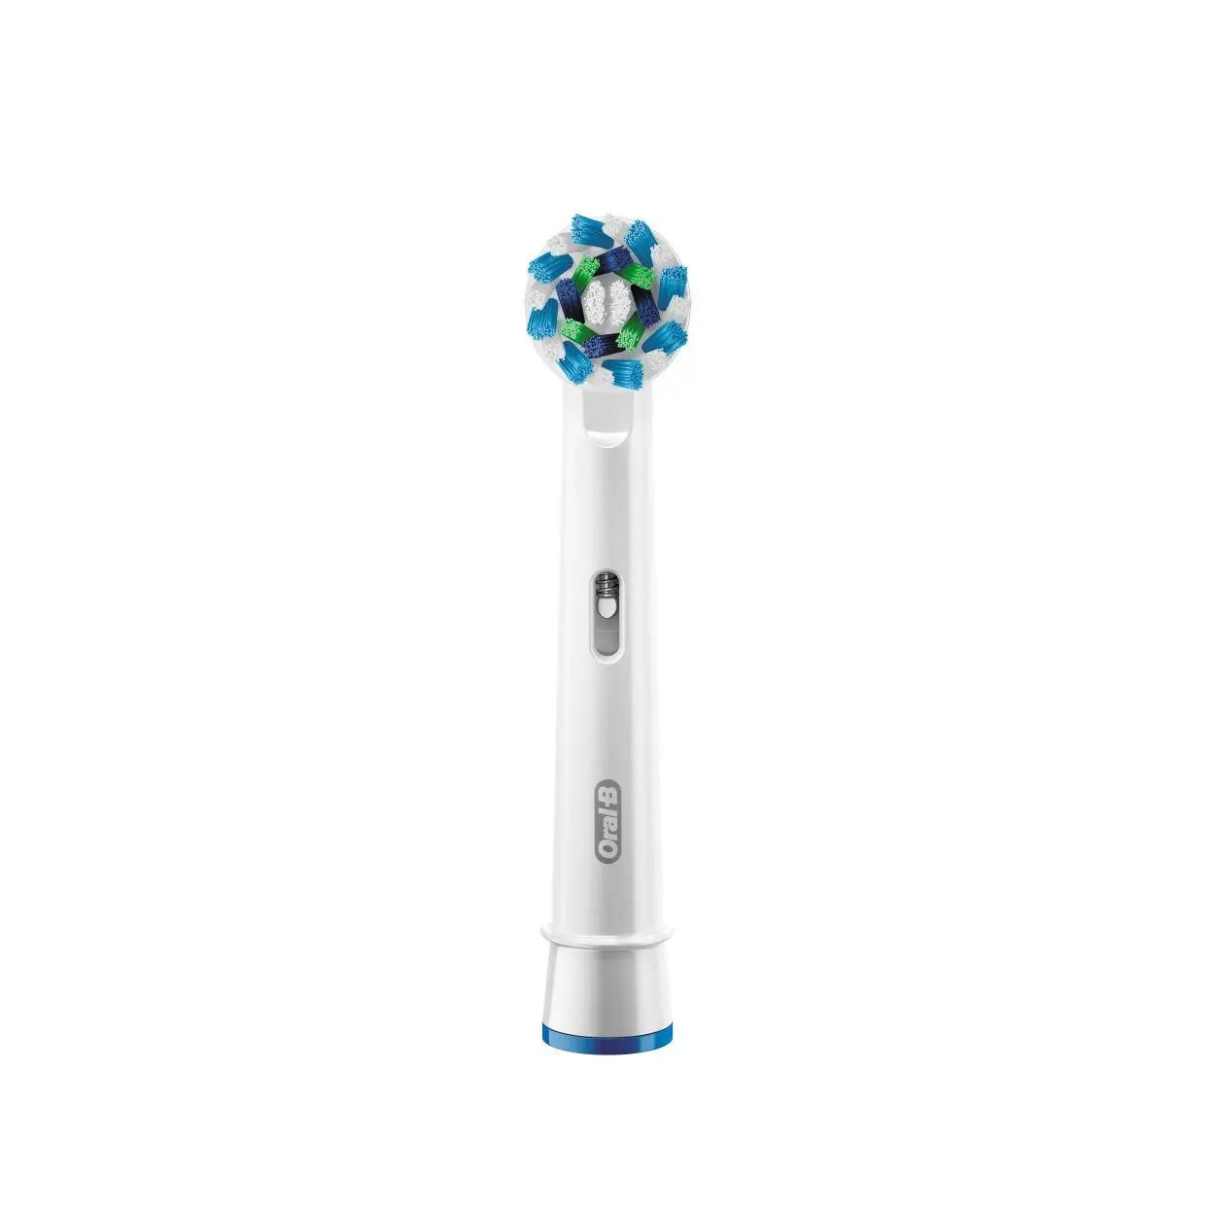 Which Oral-B Toothbrush Head Is The Best